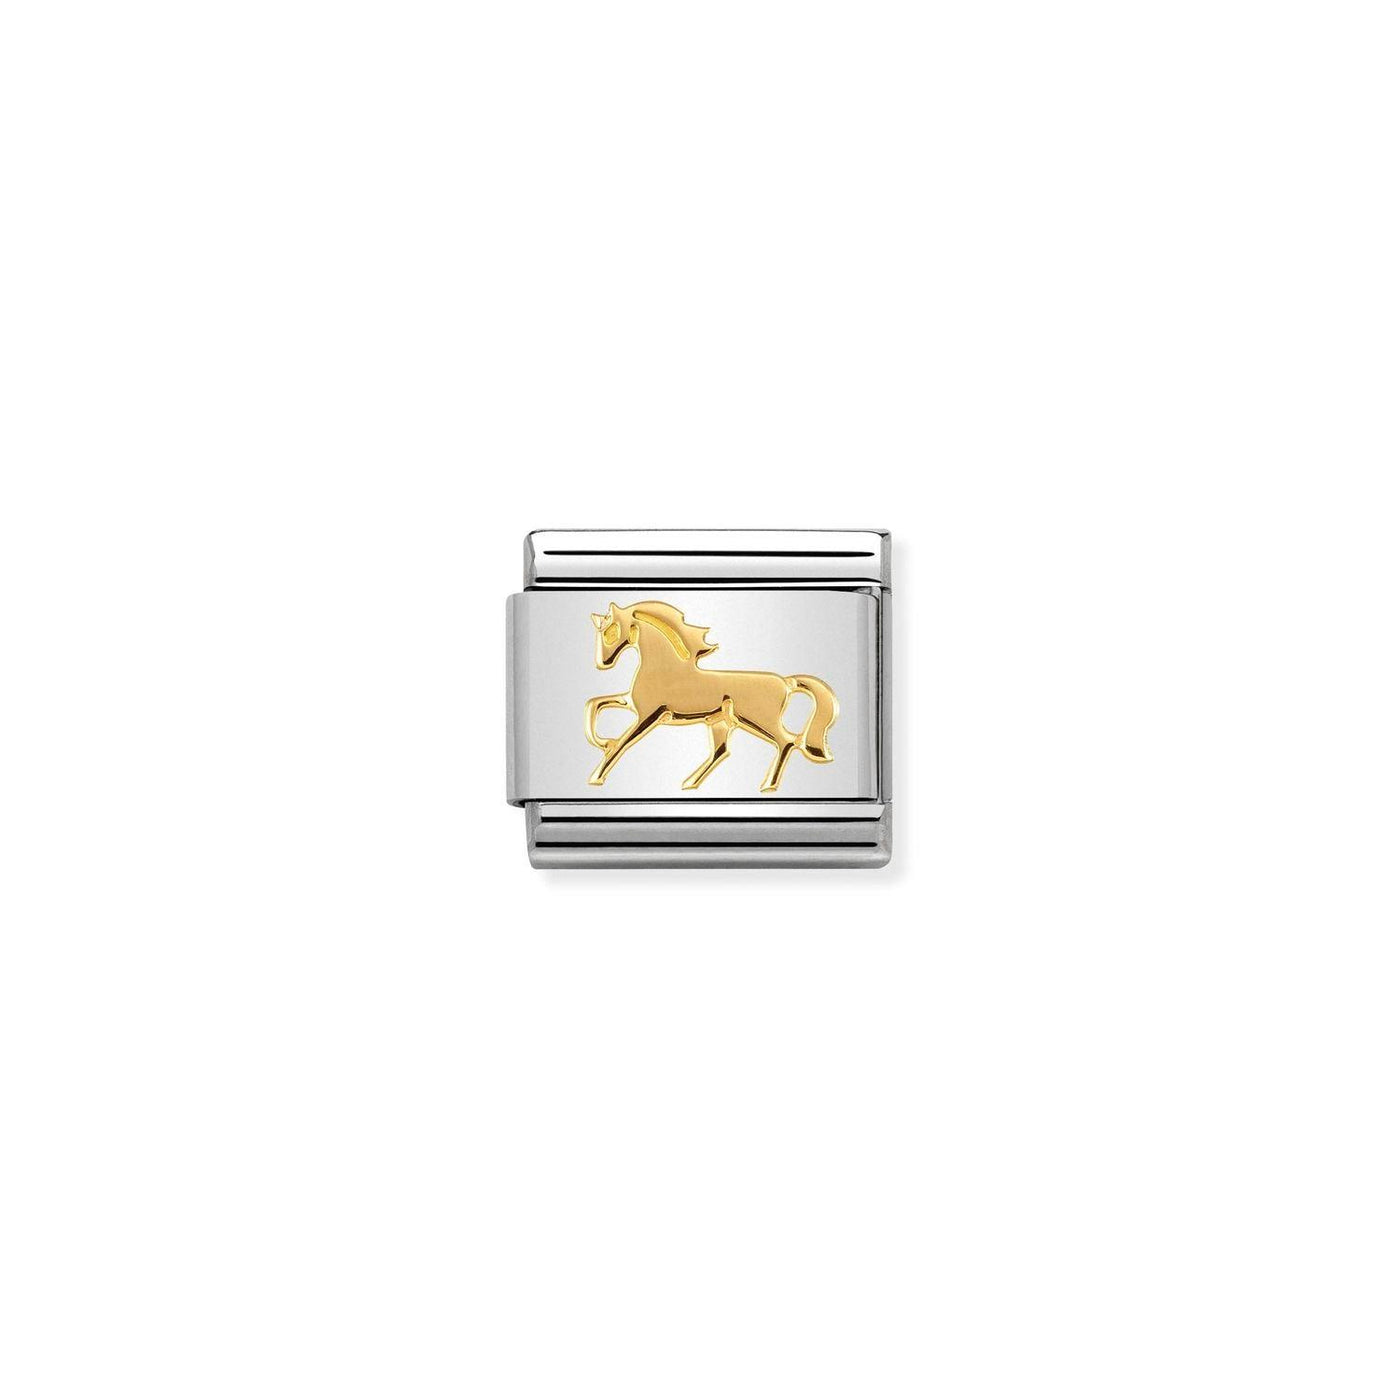 Nomination Classic Galloping Horse Charm - Rococo Jewellery